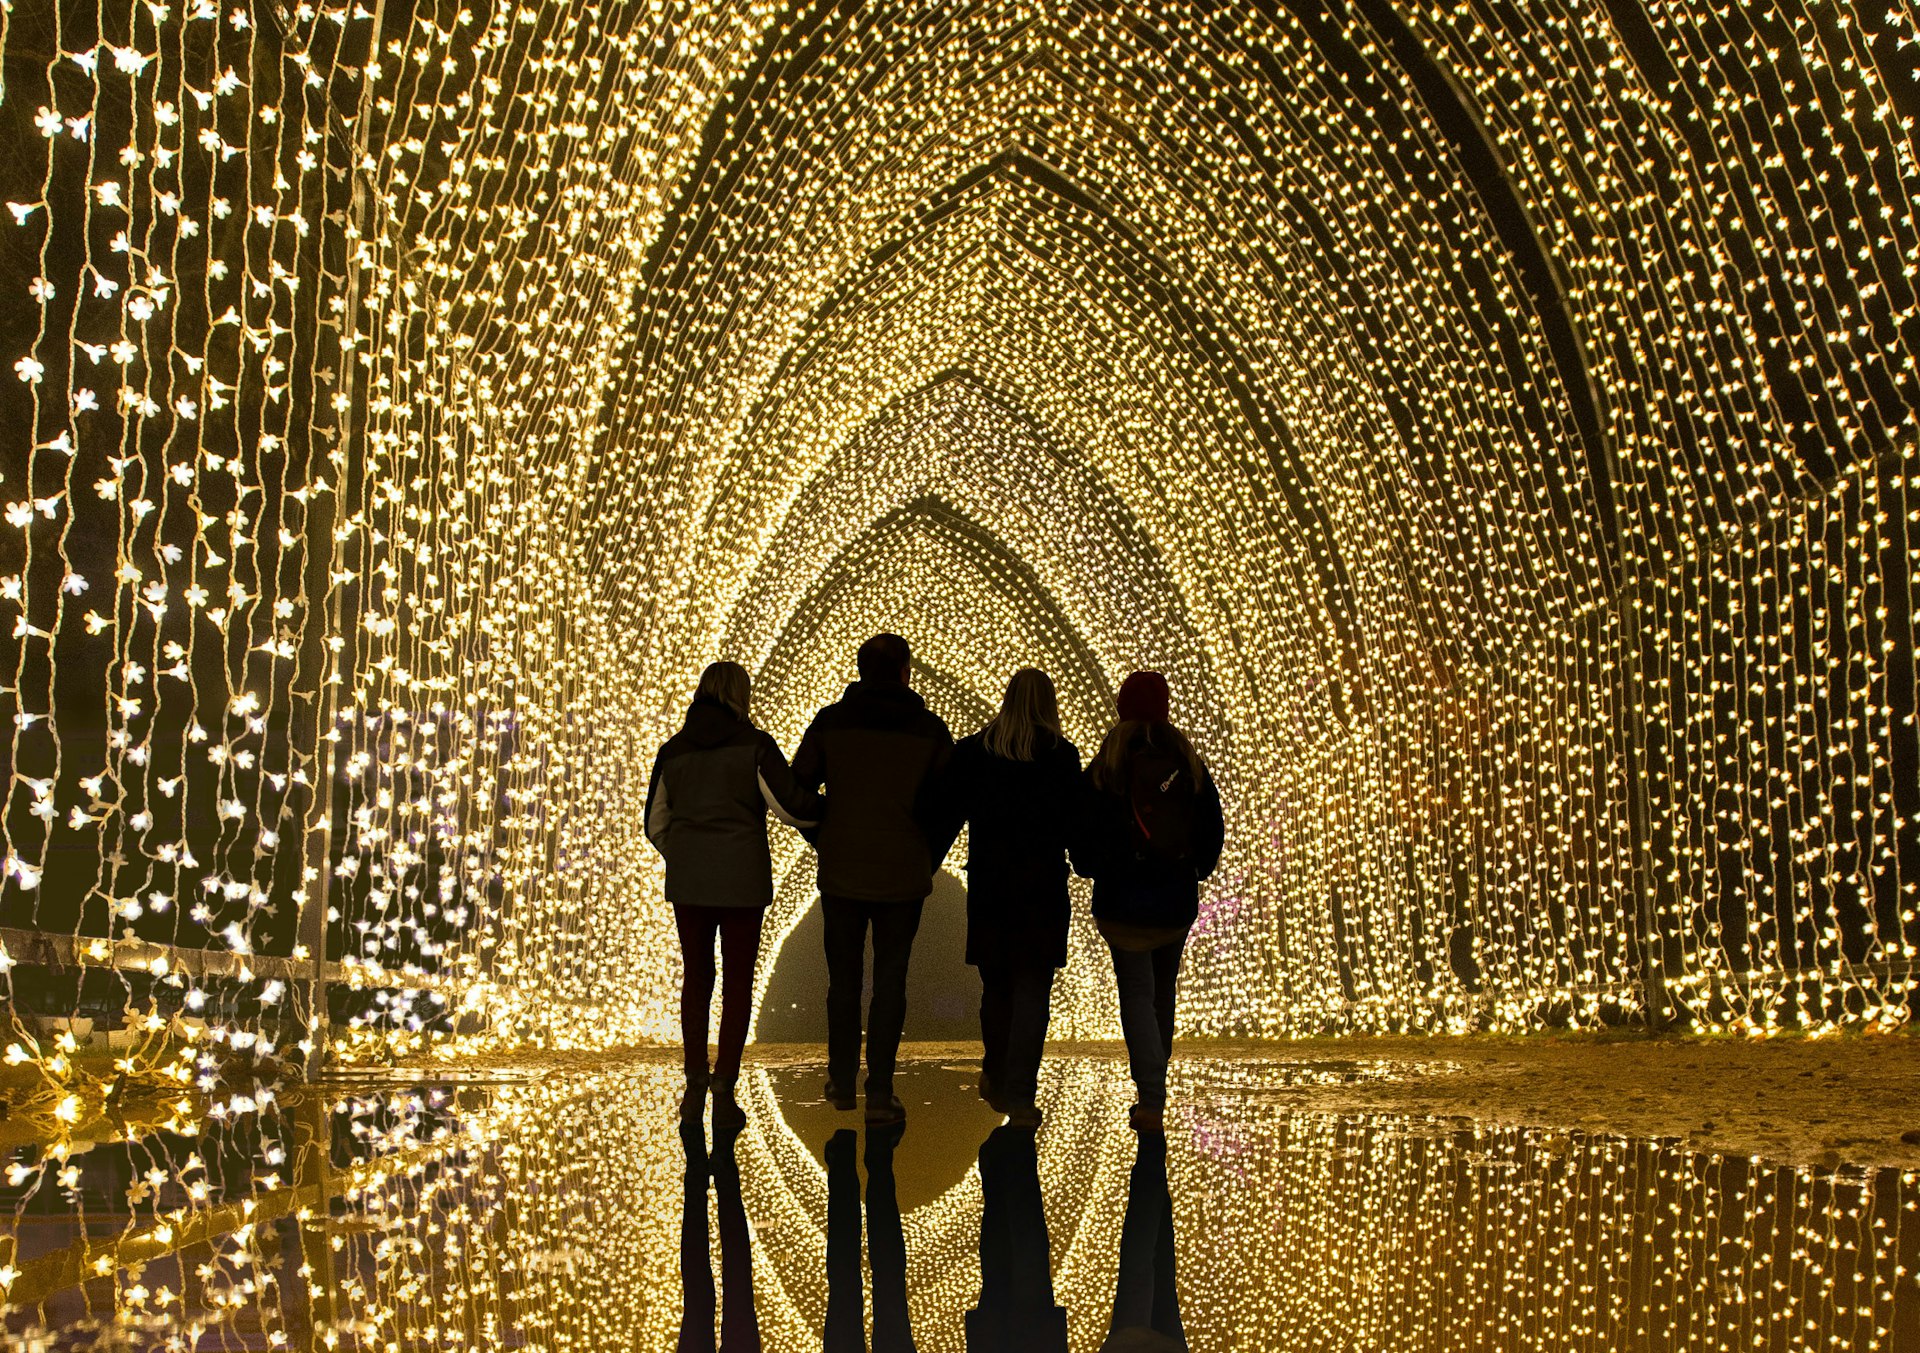 Group of friends at the Royal Botanic Gardens in Melbourne